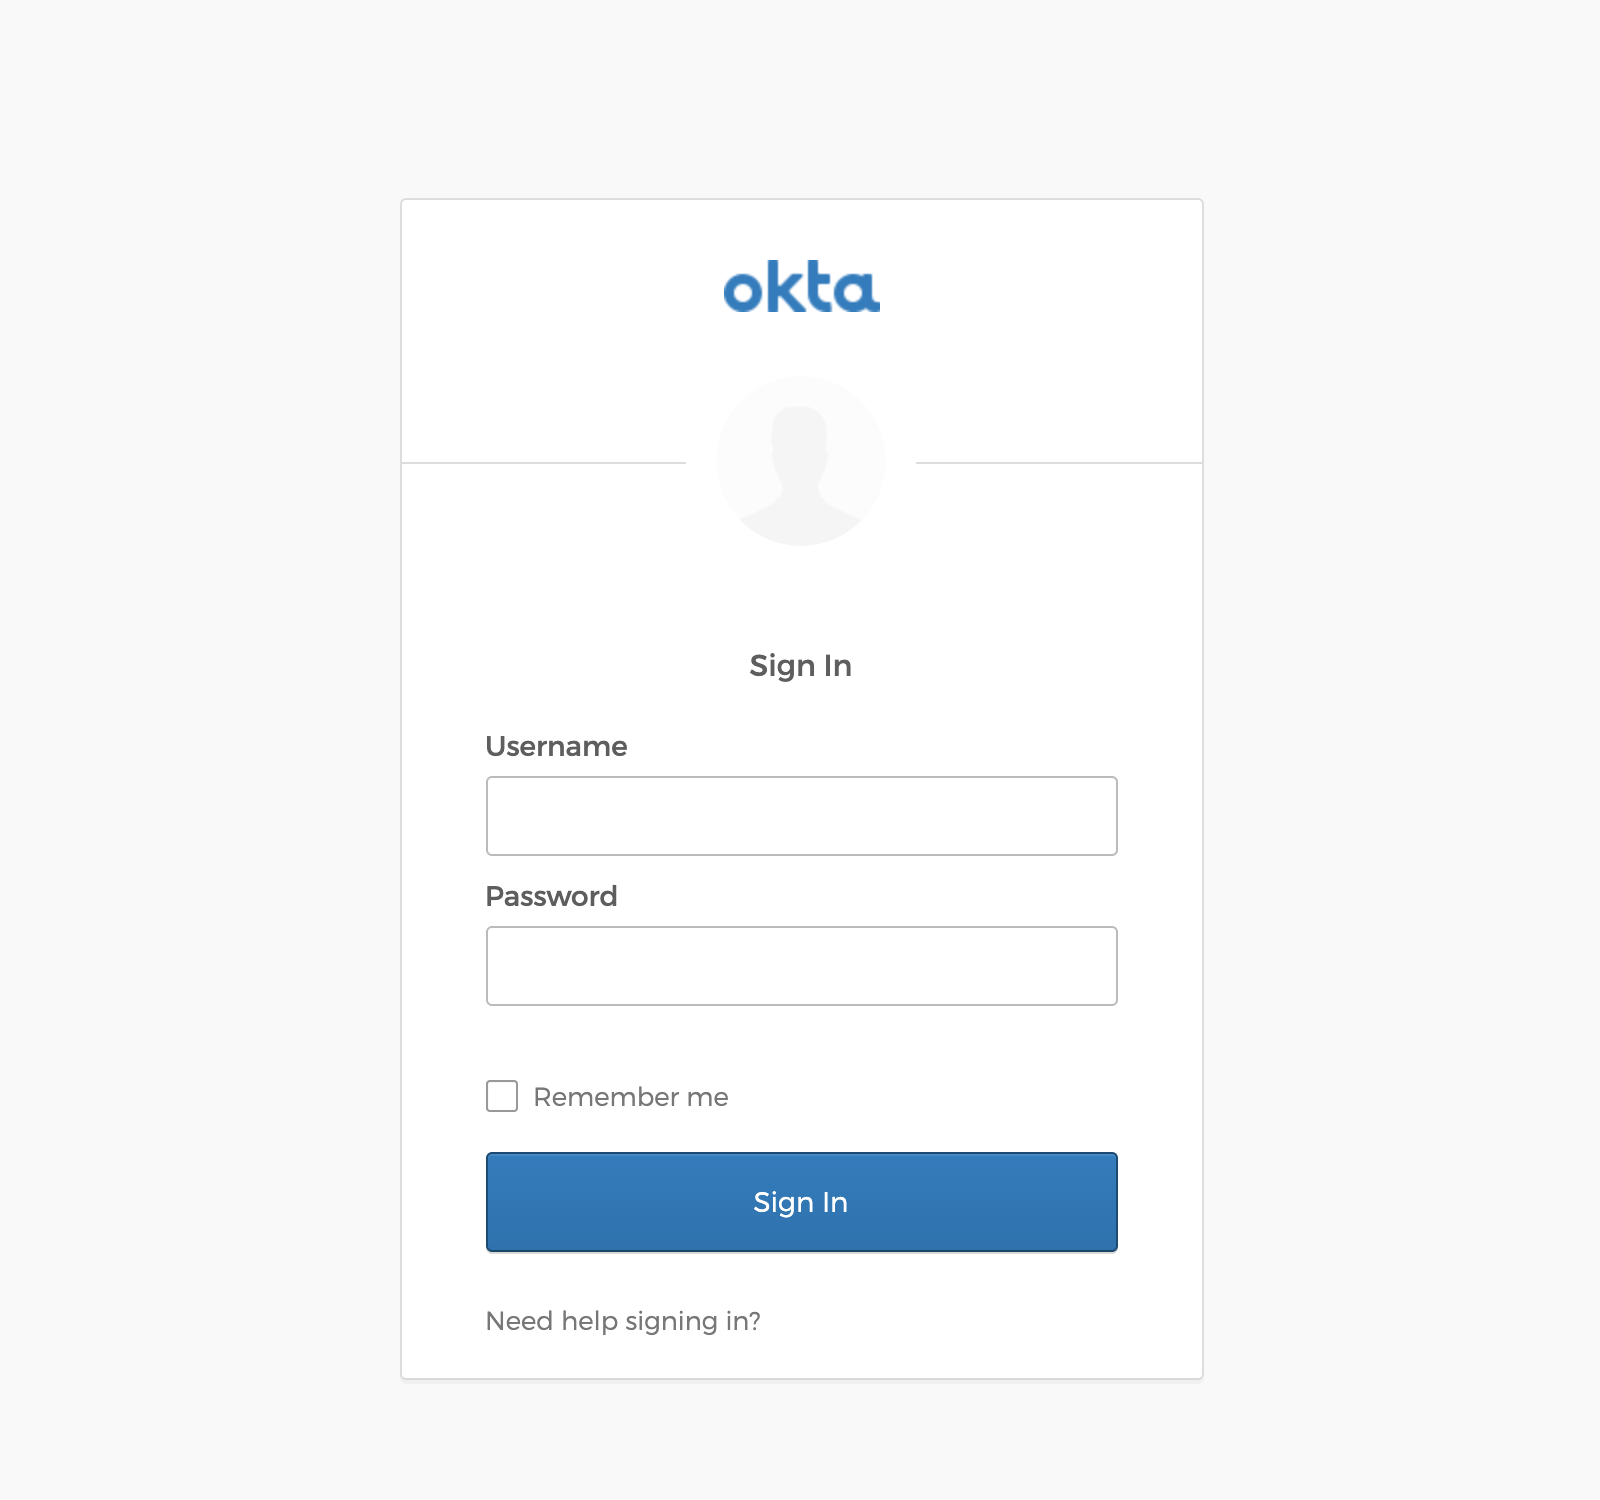 The sign-in page hosted on the Okta servers